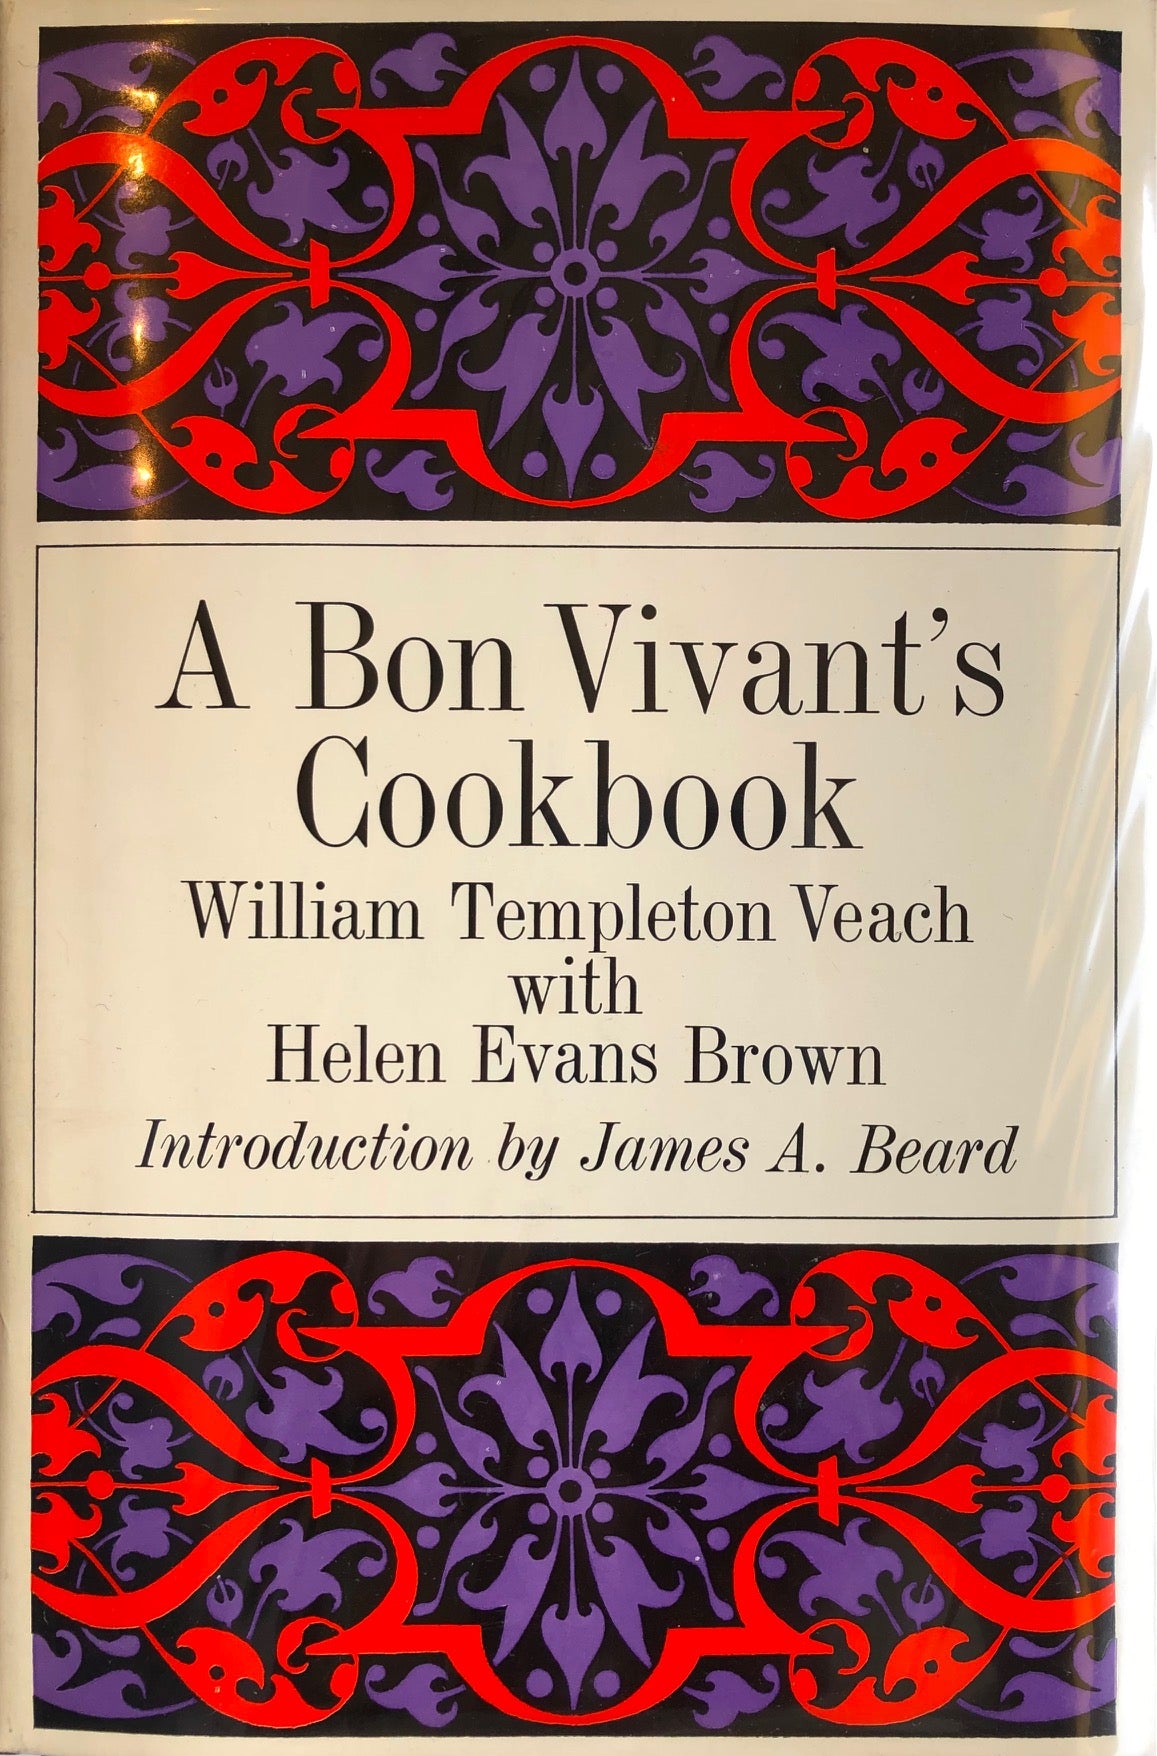 (General) William Templeton Veach & Helen Evans Brown. A Bon Vivant's Cookbook: A Collection of Fine Foreign and American Recipes. Intro. by James Beard.